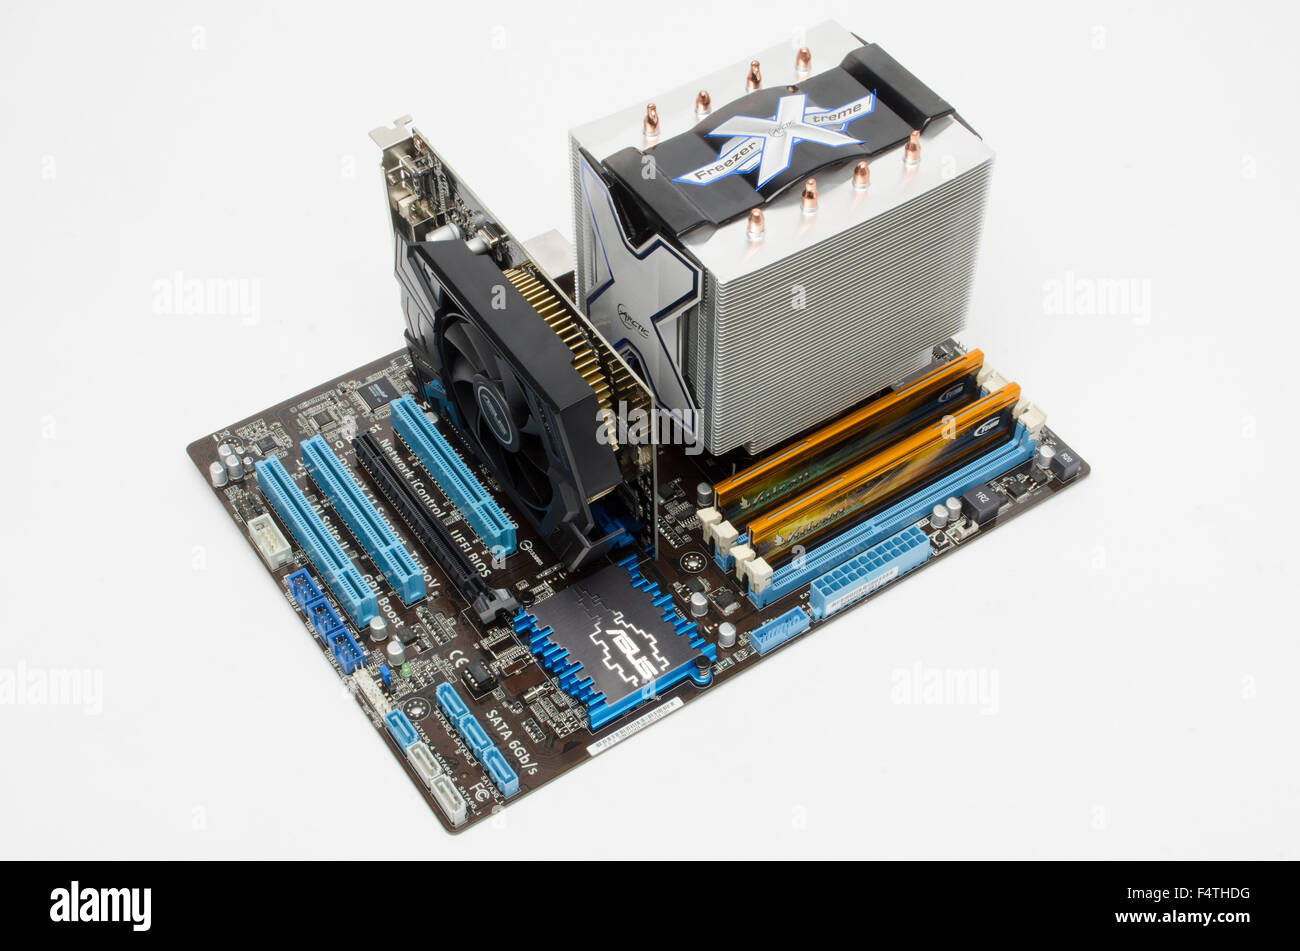 ASUS motherboard with Arctic Cooler Freezer Xtreme CPU cooler, Team Vulcan DDR3 memory sticks, and ASUS graphics card in situ. Stock Photo